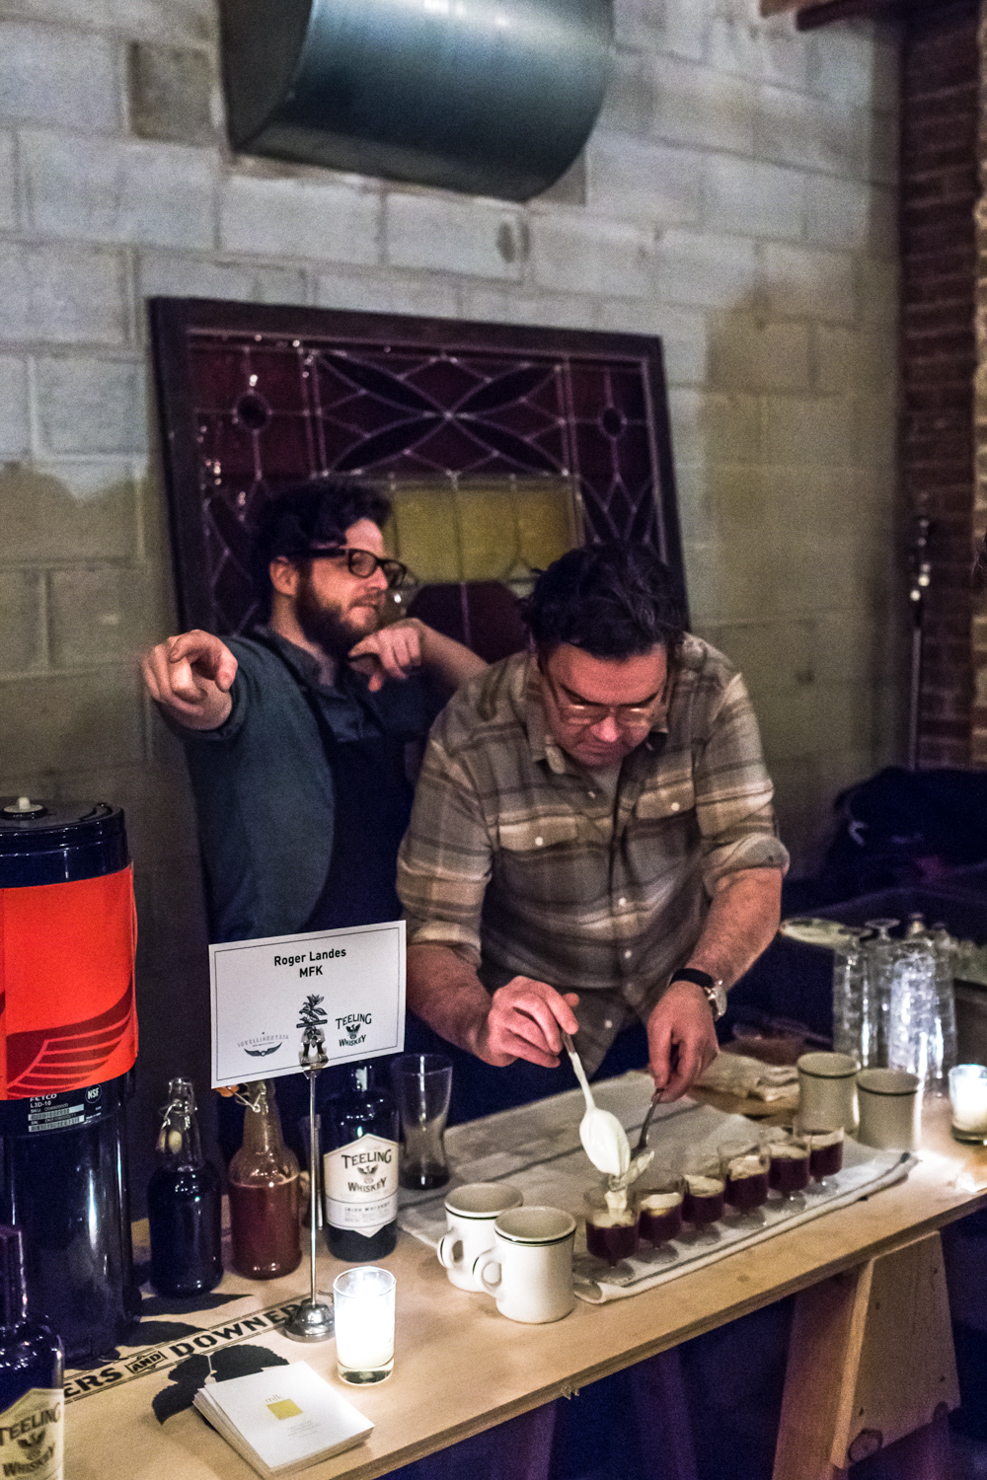 uppers and downers irish coffee party thalia hall chicago illinois intelligentsia teeling whiskey beer hunting event sprudge